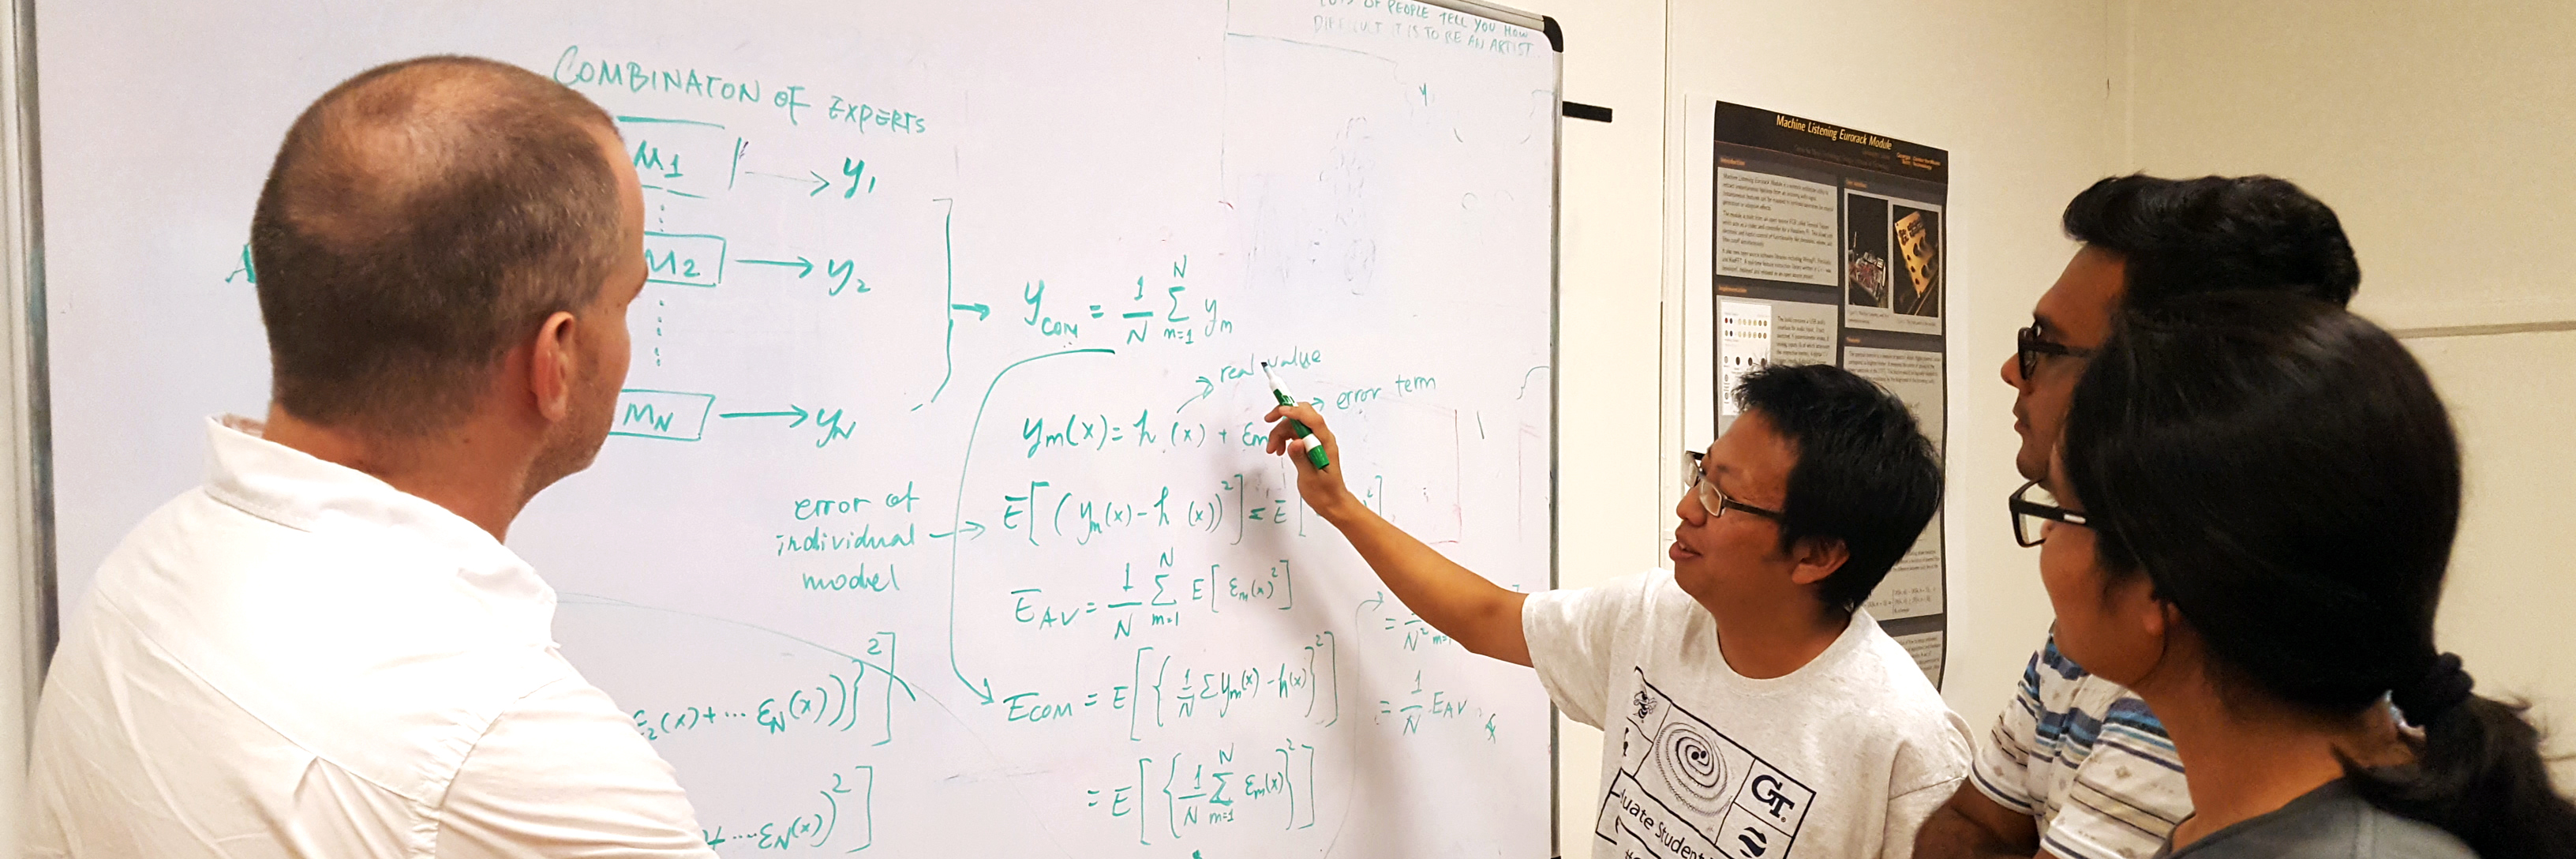 Three students discuss a class topic with a professor, pointing to a white board.